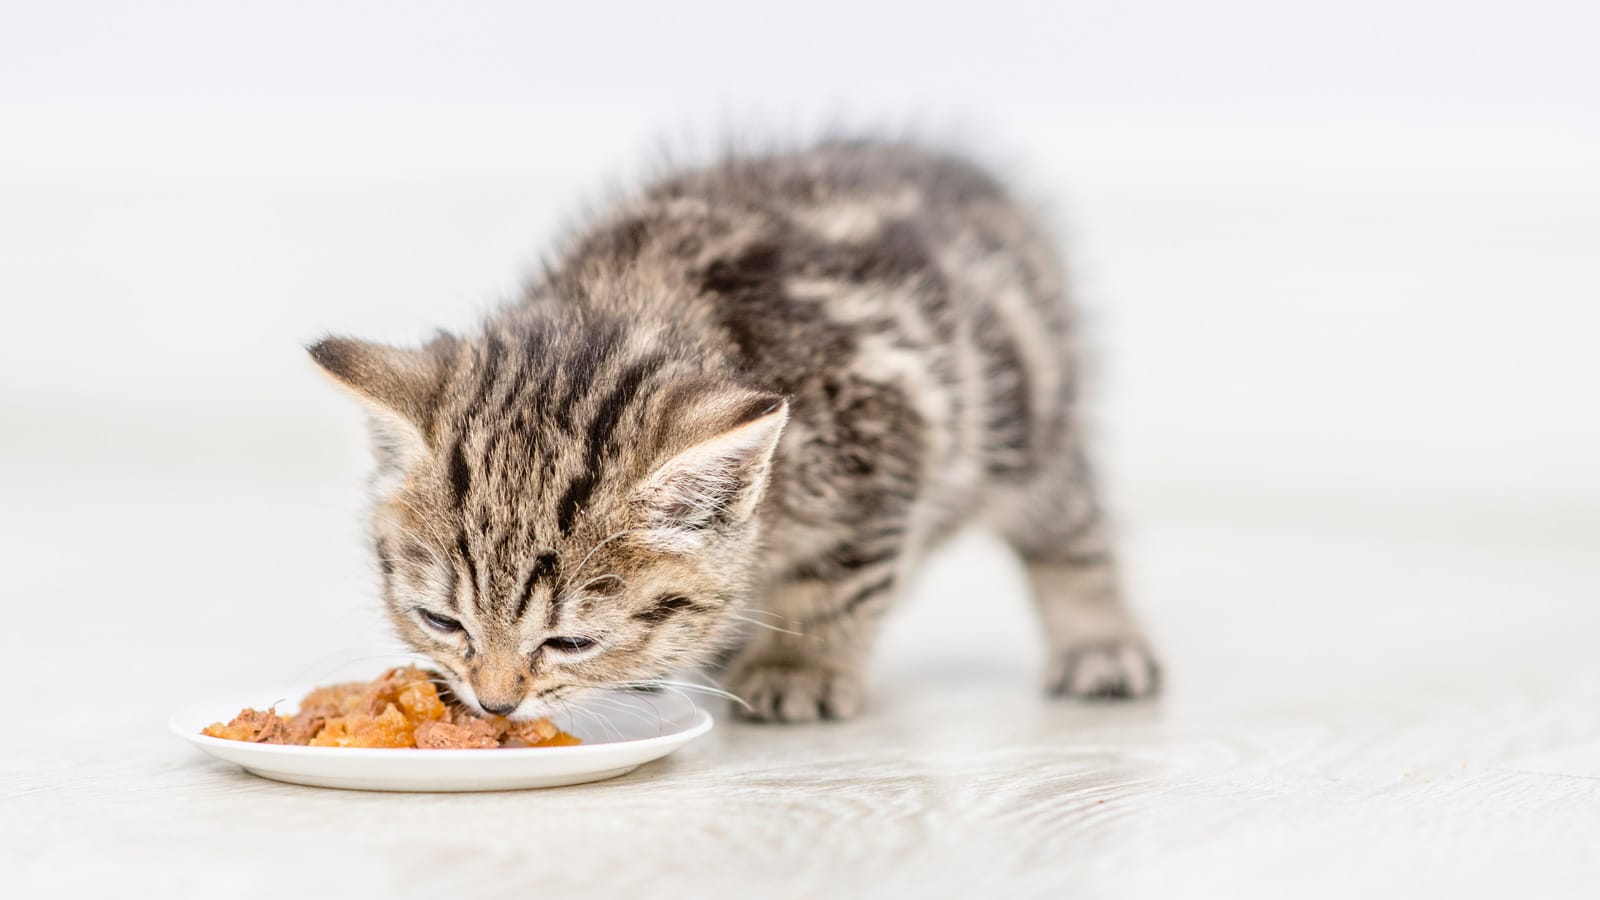 Baby kitten eating food from a plate at home